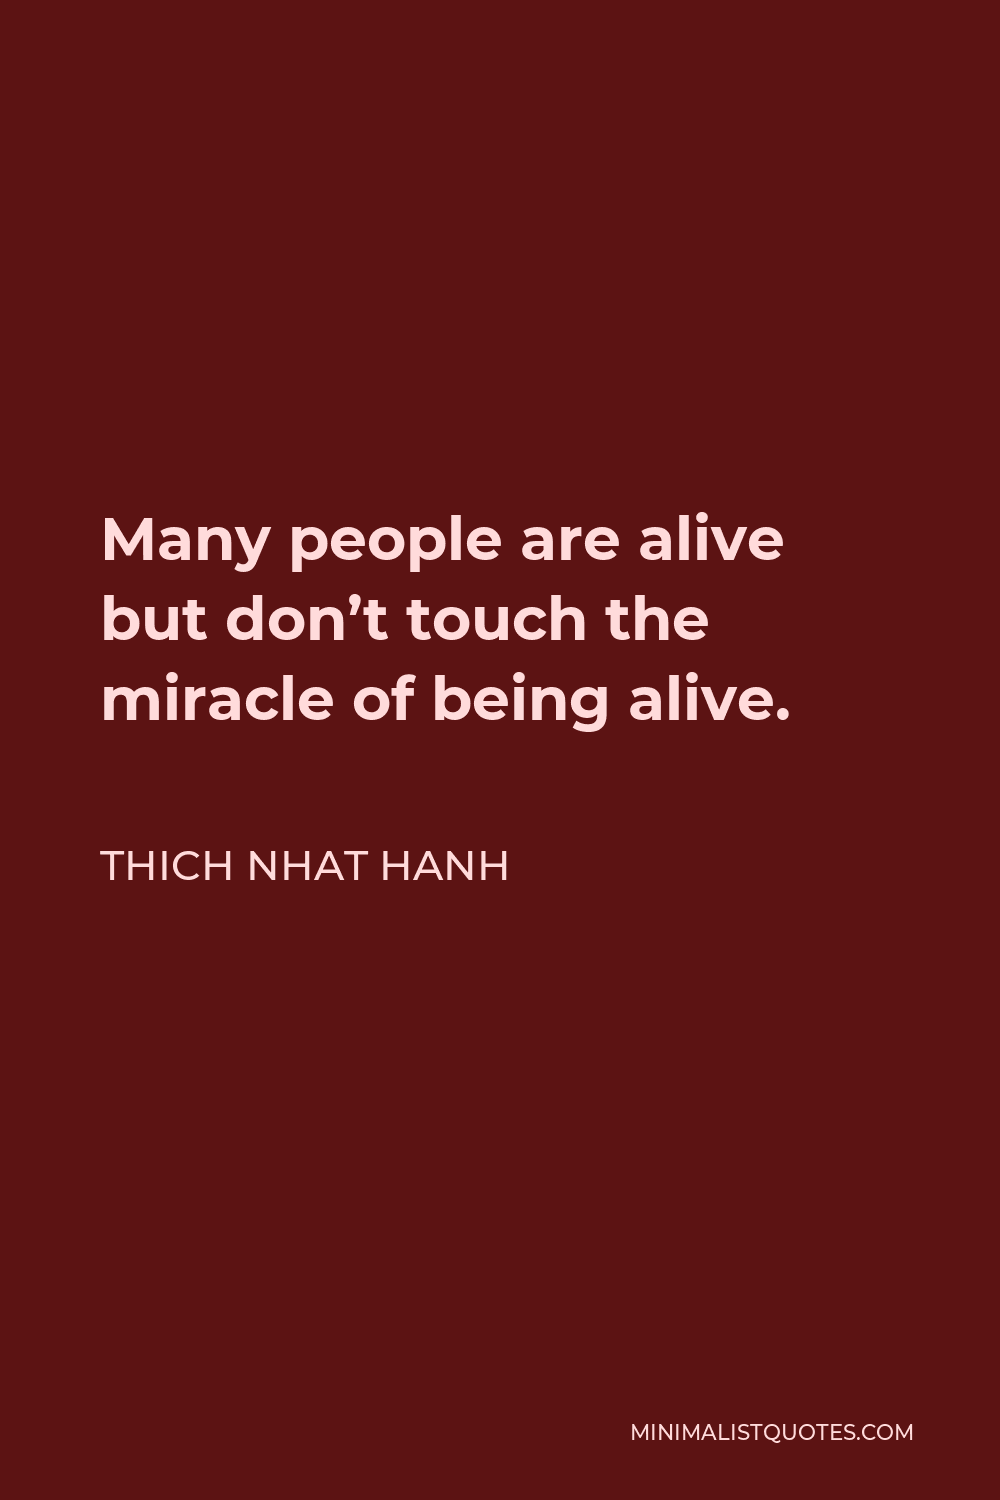 Thich Nhat Hanh Quote - Many people are alive but don’t touch the miracle of being alive.